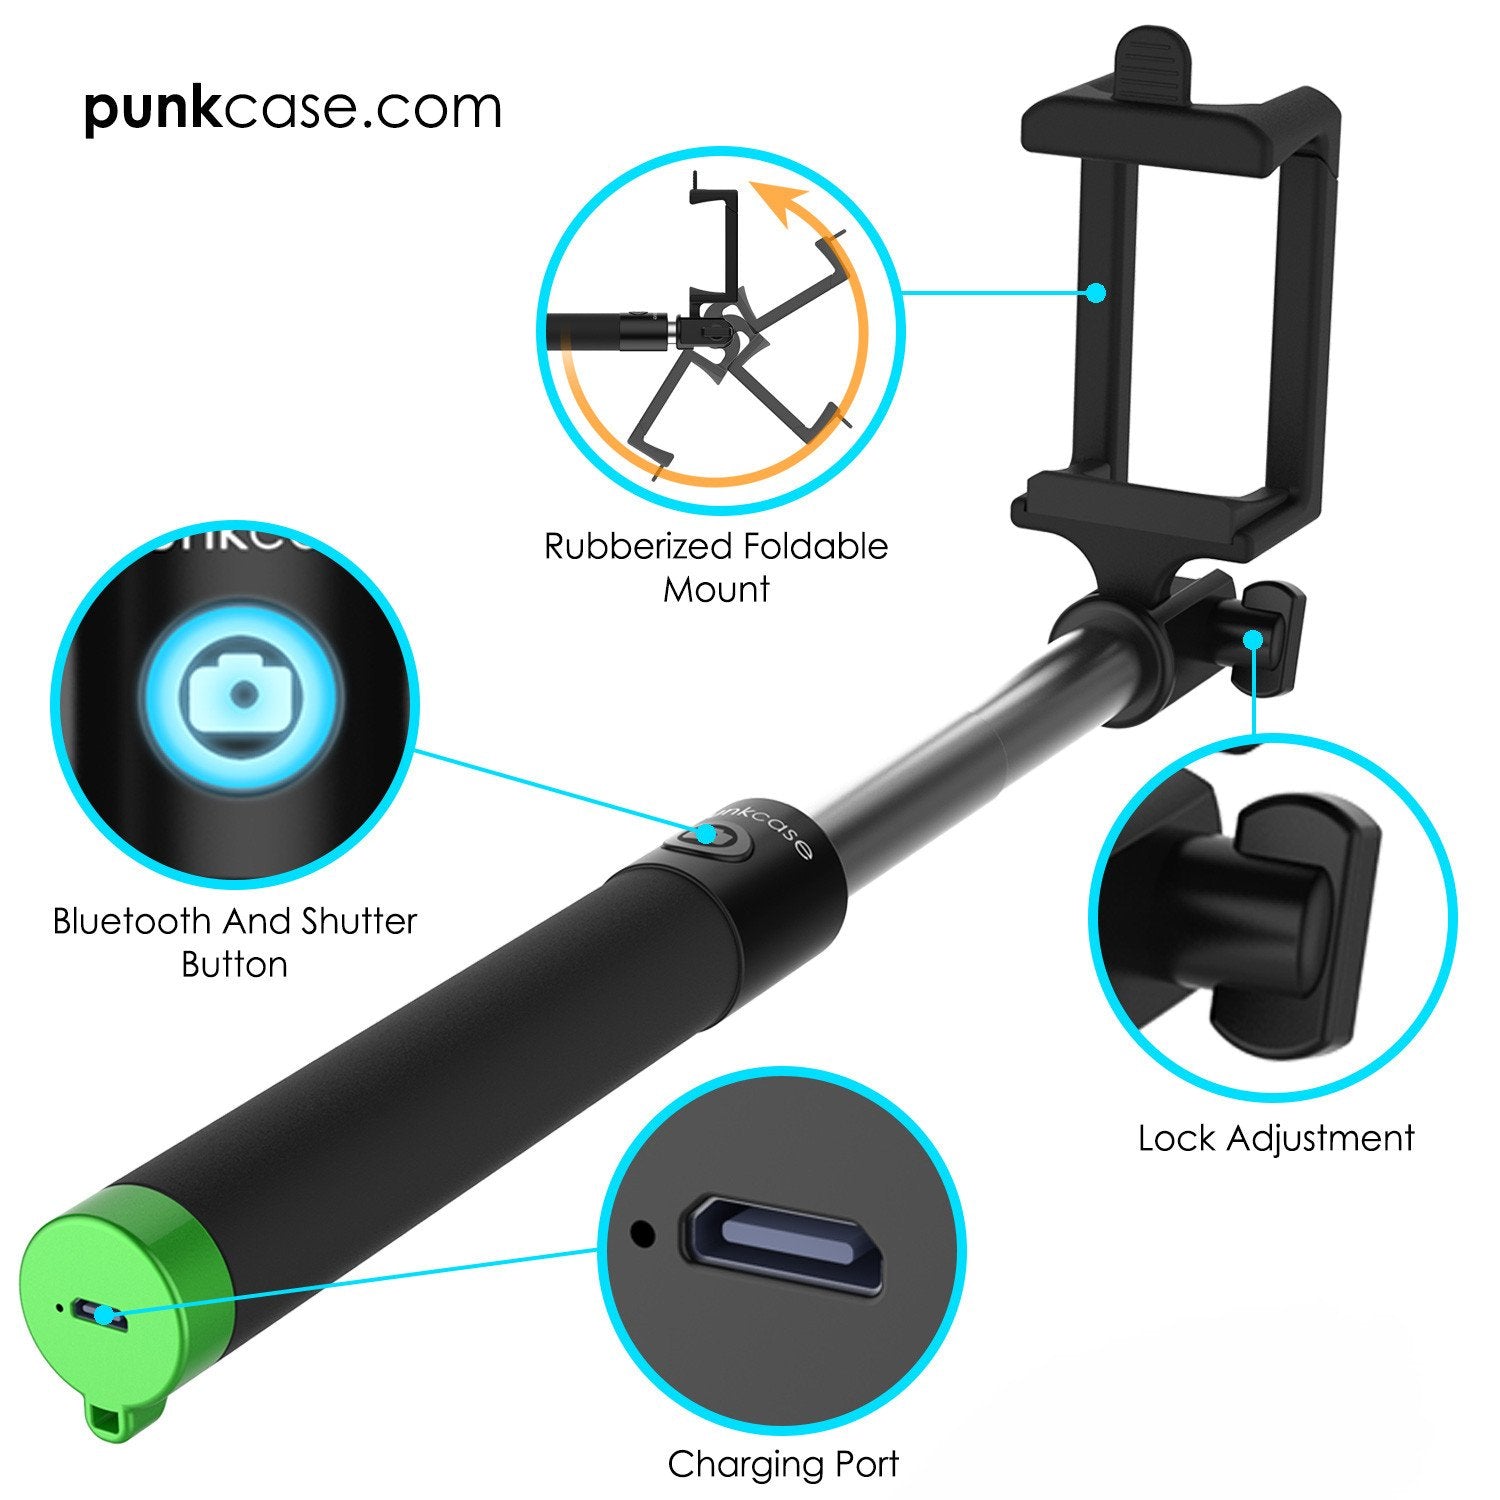 Selfie Stick - Green, Extendable Monopod with Built-In Bluetooth Remote Shutter - PunkCase NZ